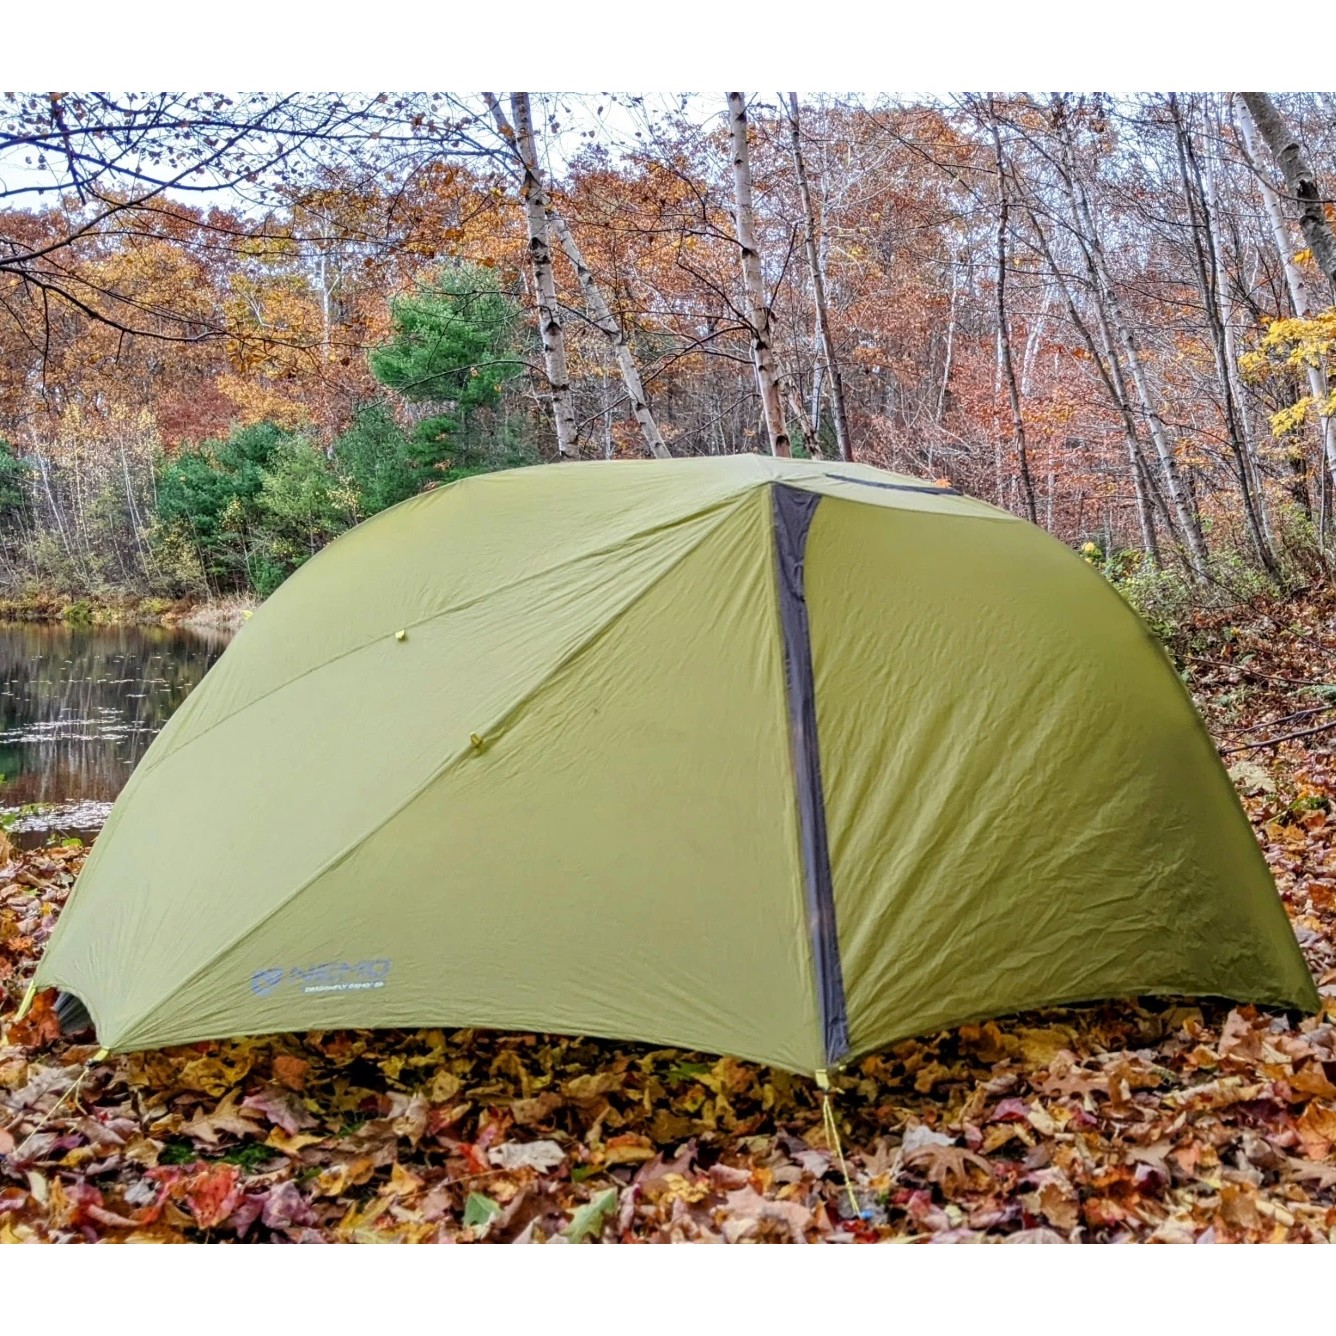 Nemo Dragonfly OSMO 2 Ultralight Backpacking Tent